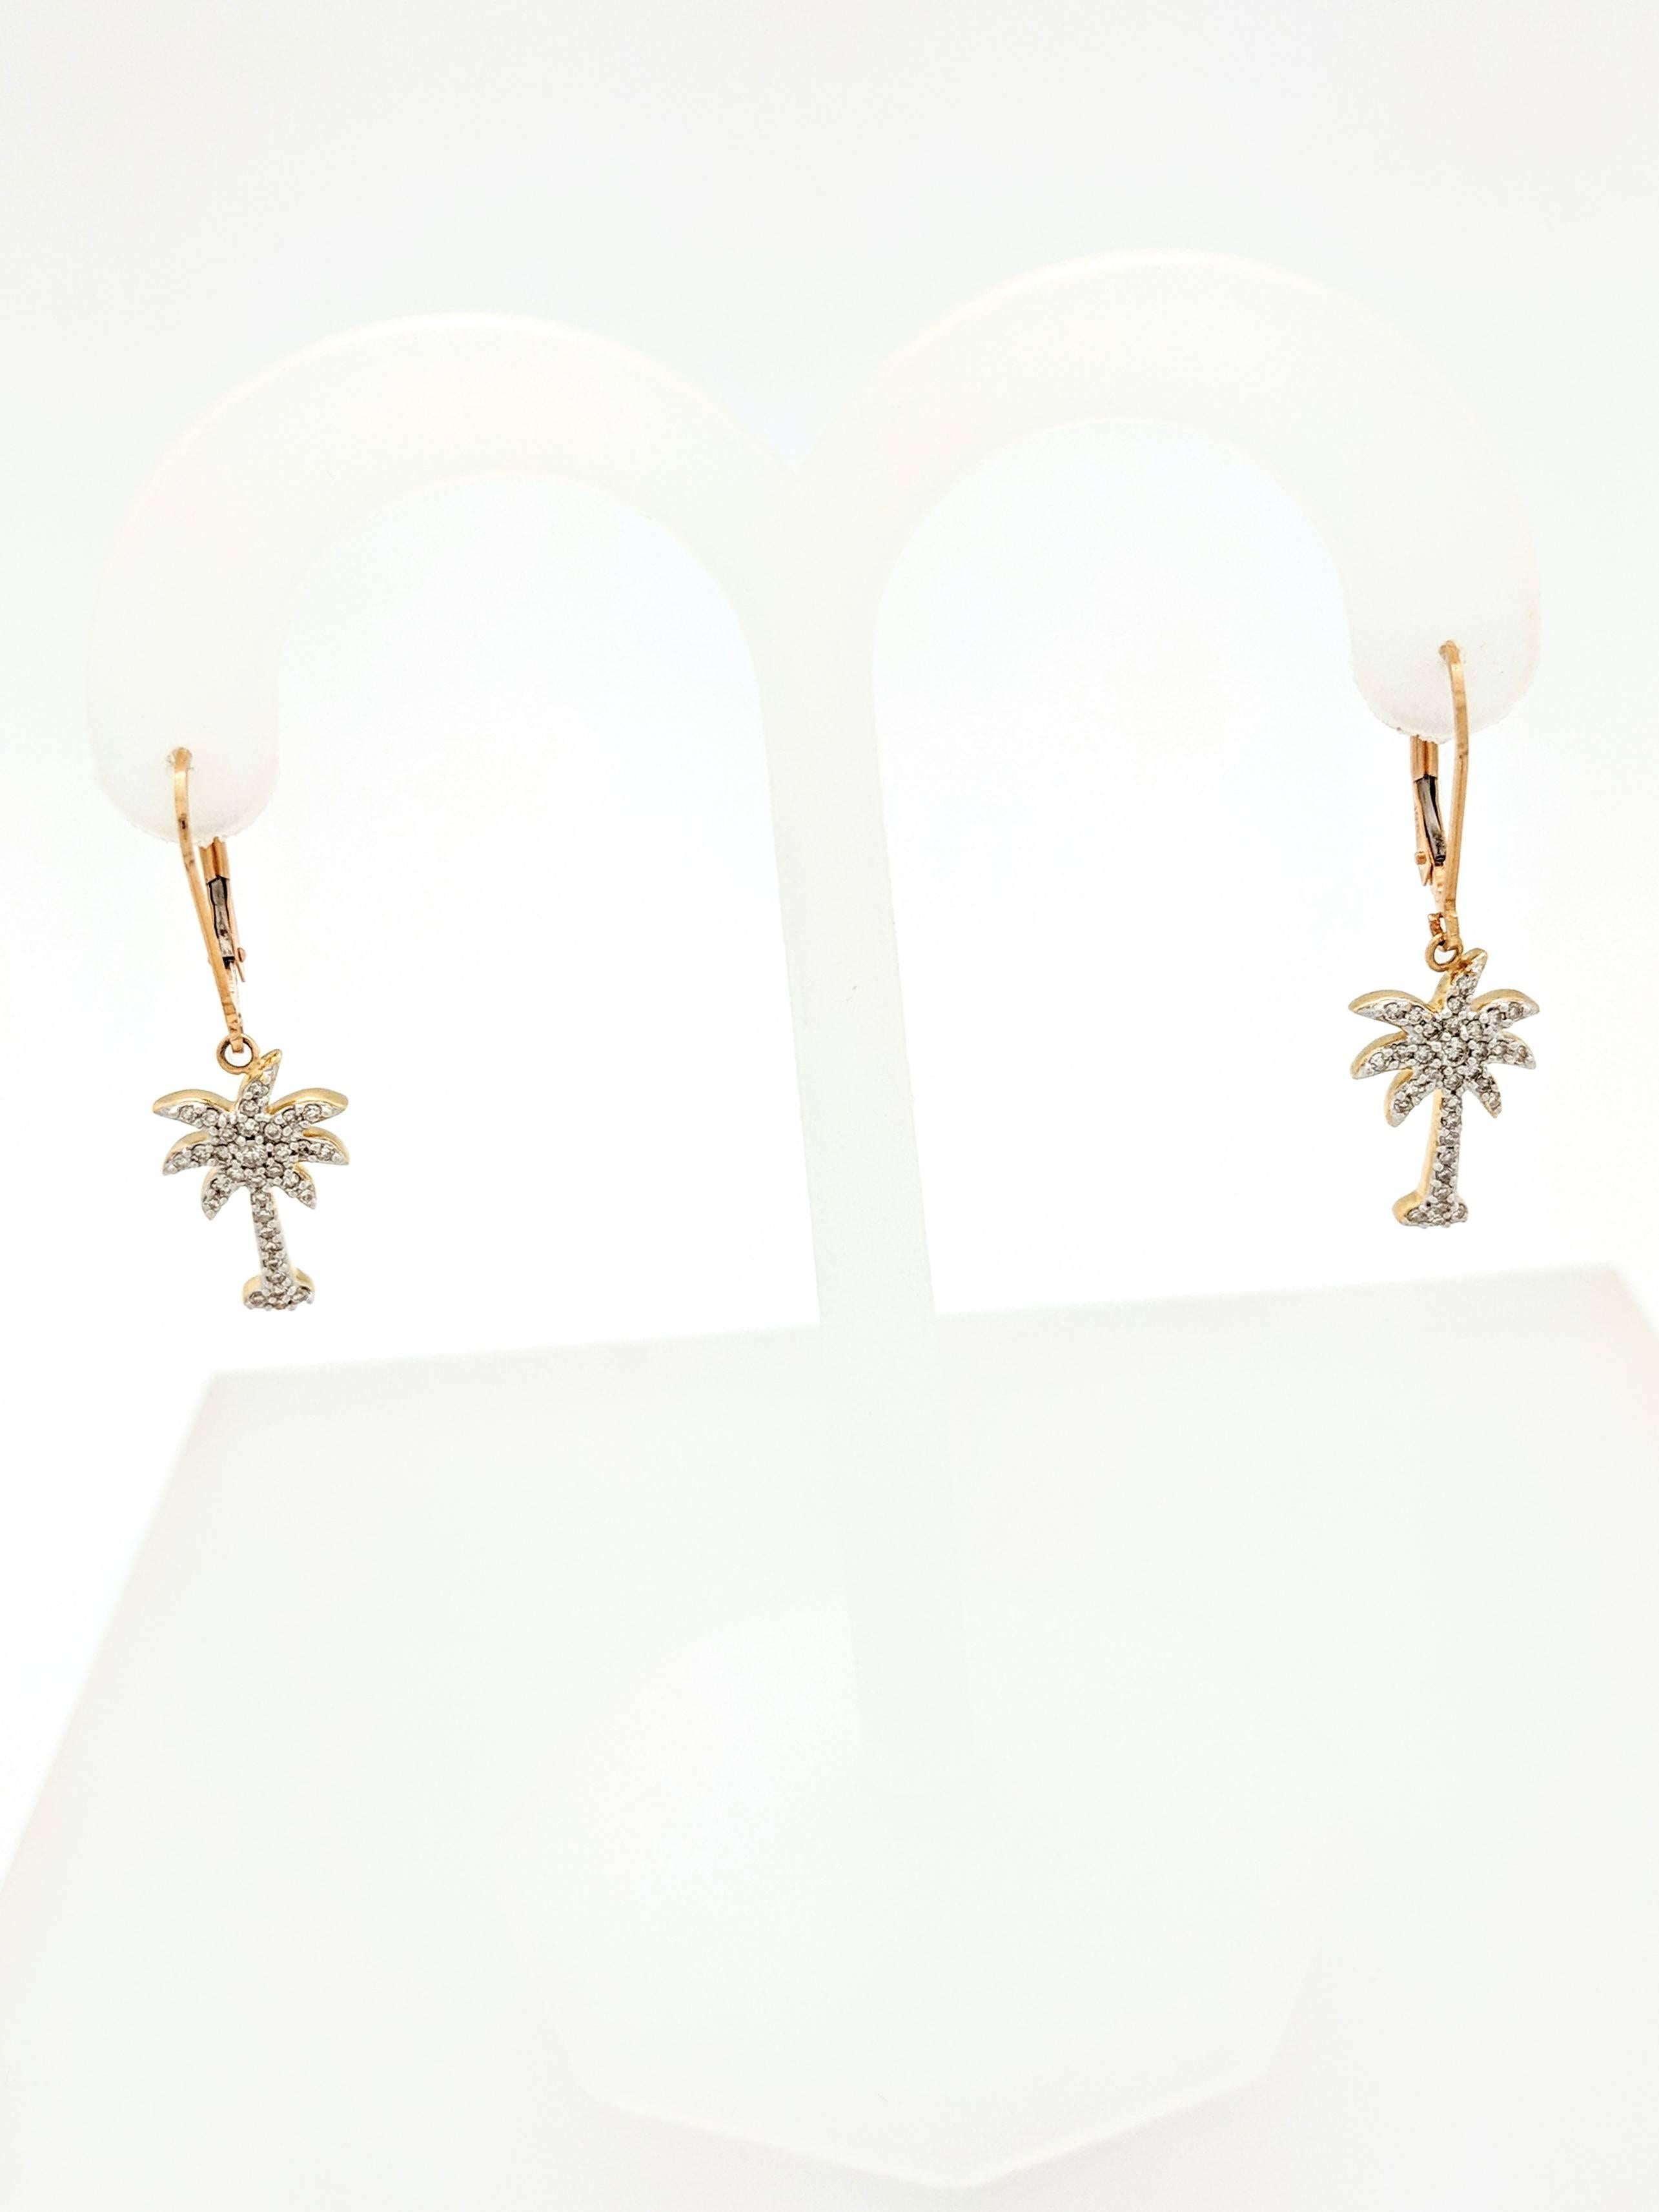 Ladies 14K Yellow Gold .70ctw Diamond Palm Tree Dangle Earrings SI2/H

You are viewing a pair of gorgeous diamond palm tree dangle/drop earrings. These earrings are crafted from 14k yellow gold, weigh 2.5 grams and measure 1 1/4